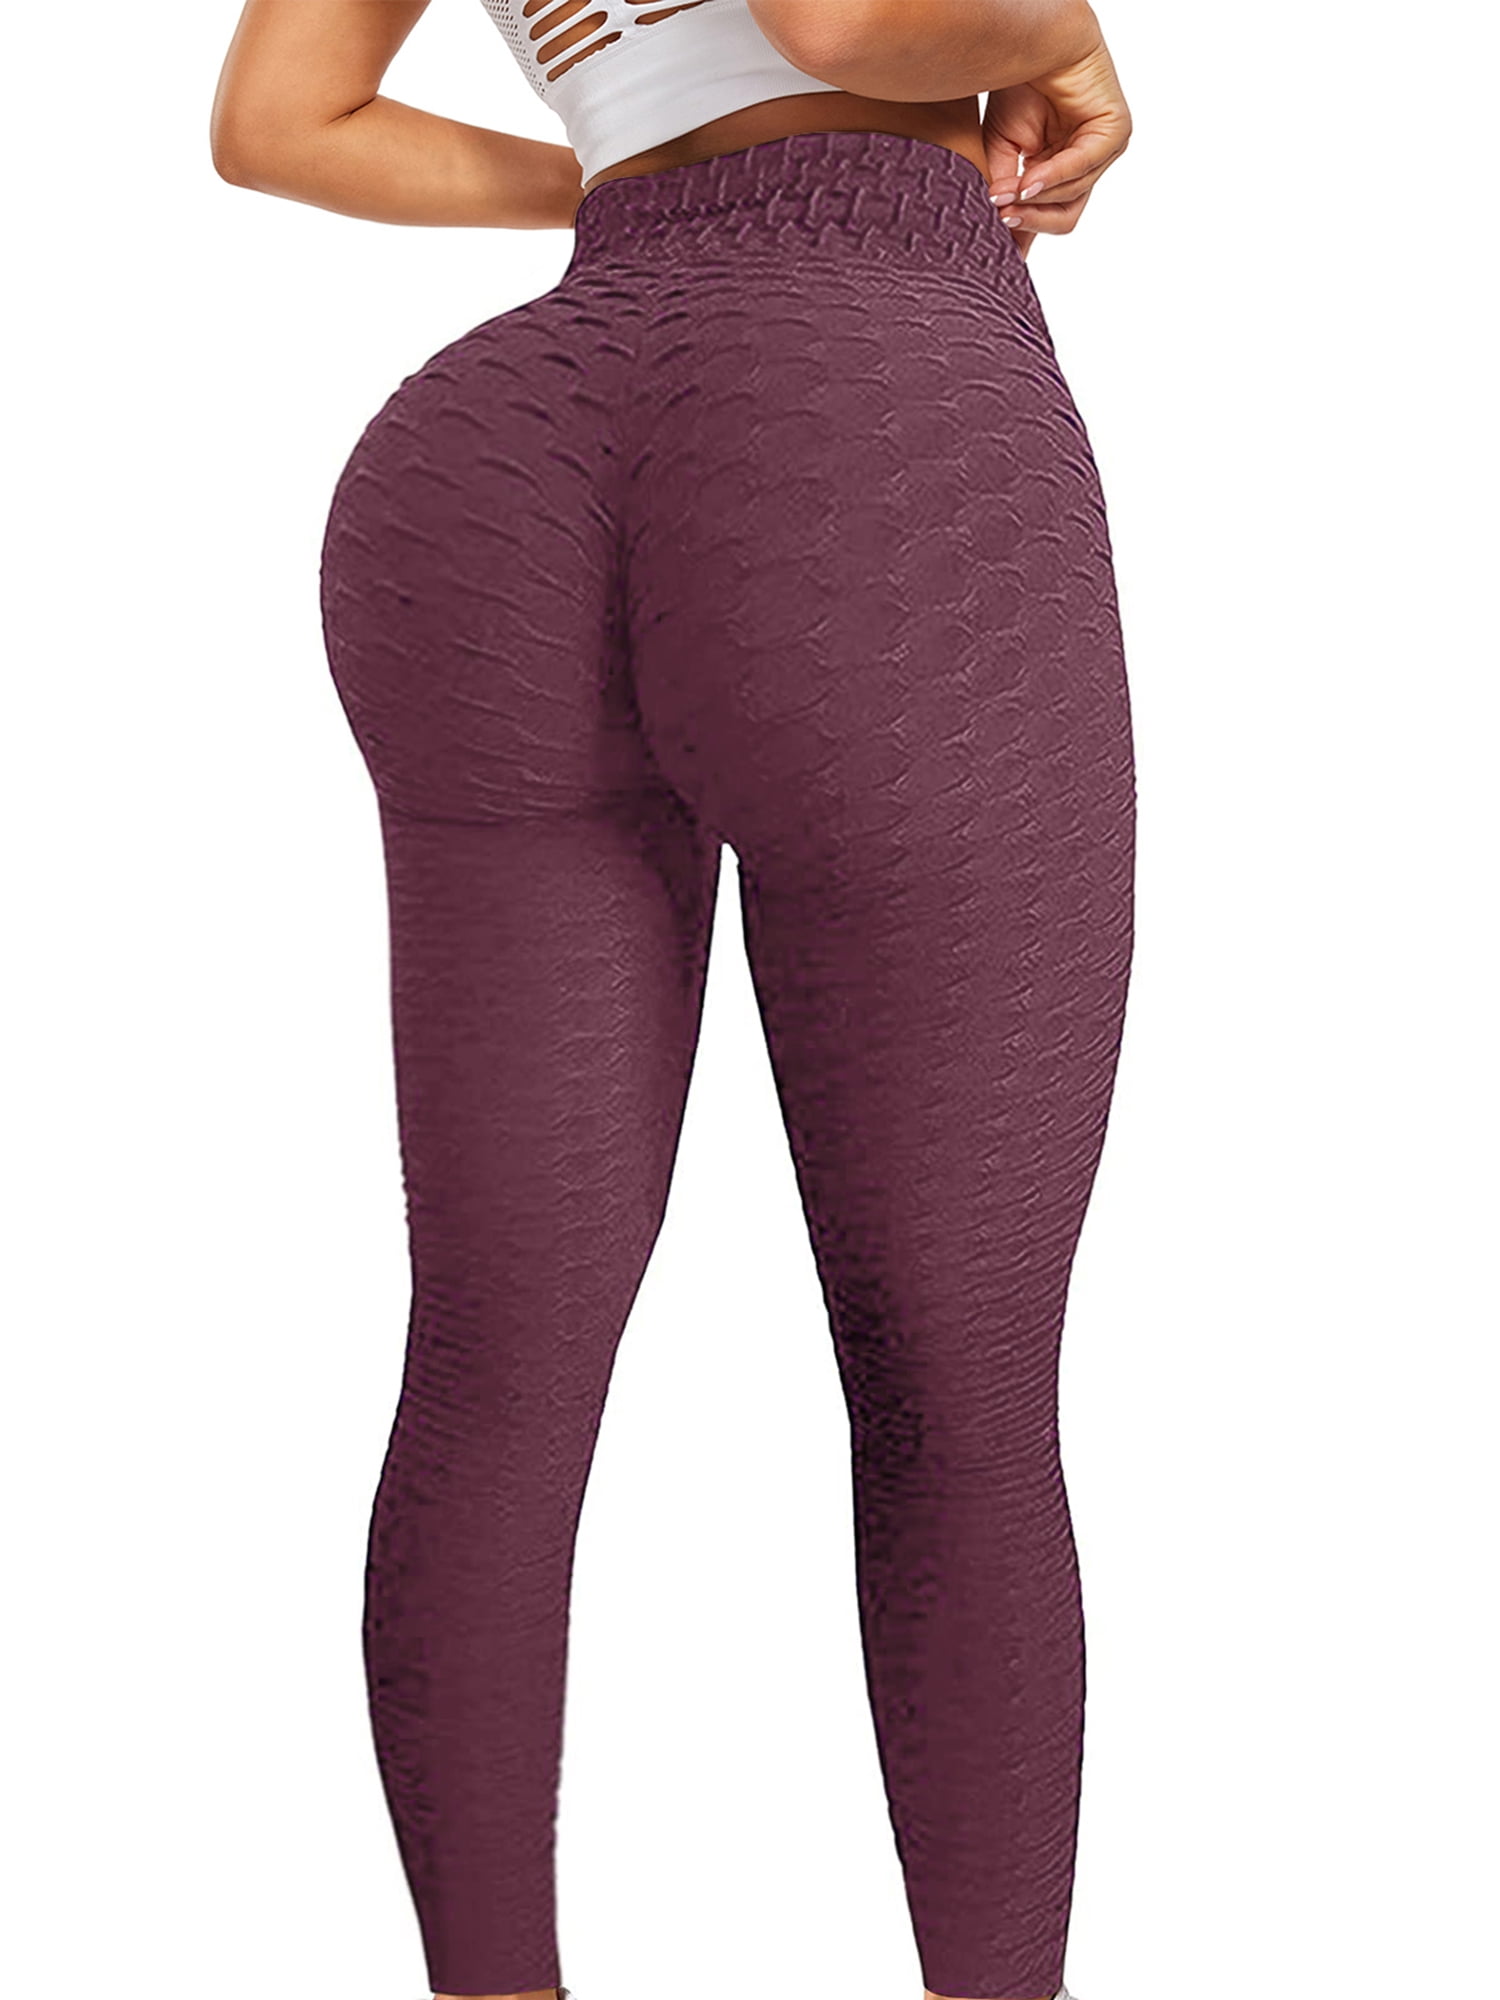 FUTATA Butt Lifting High Waist Yoga Pants Tummy Control Workout Ruched  Leggings Textured Booty Tights 